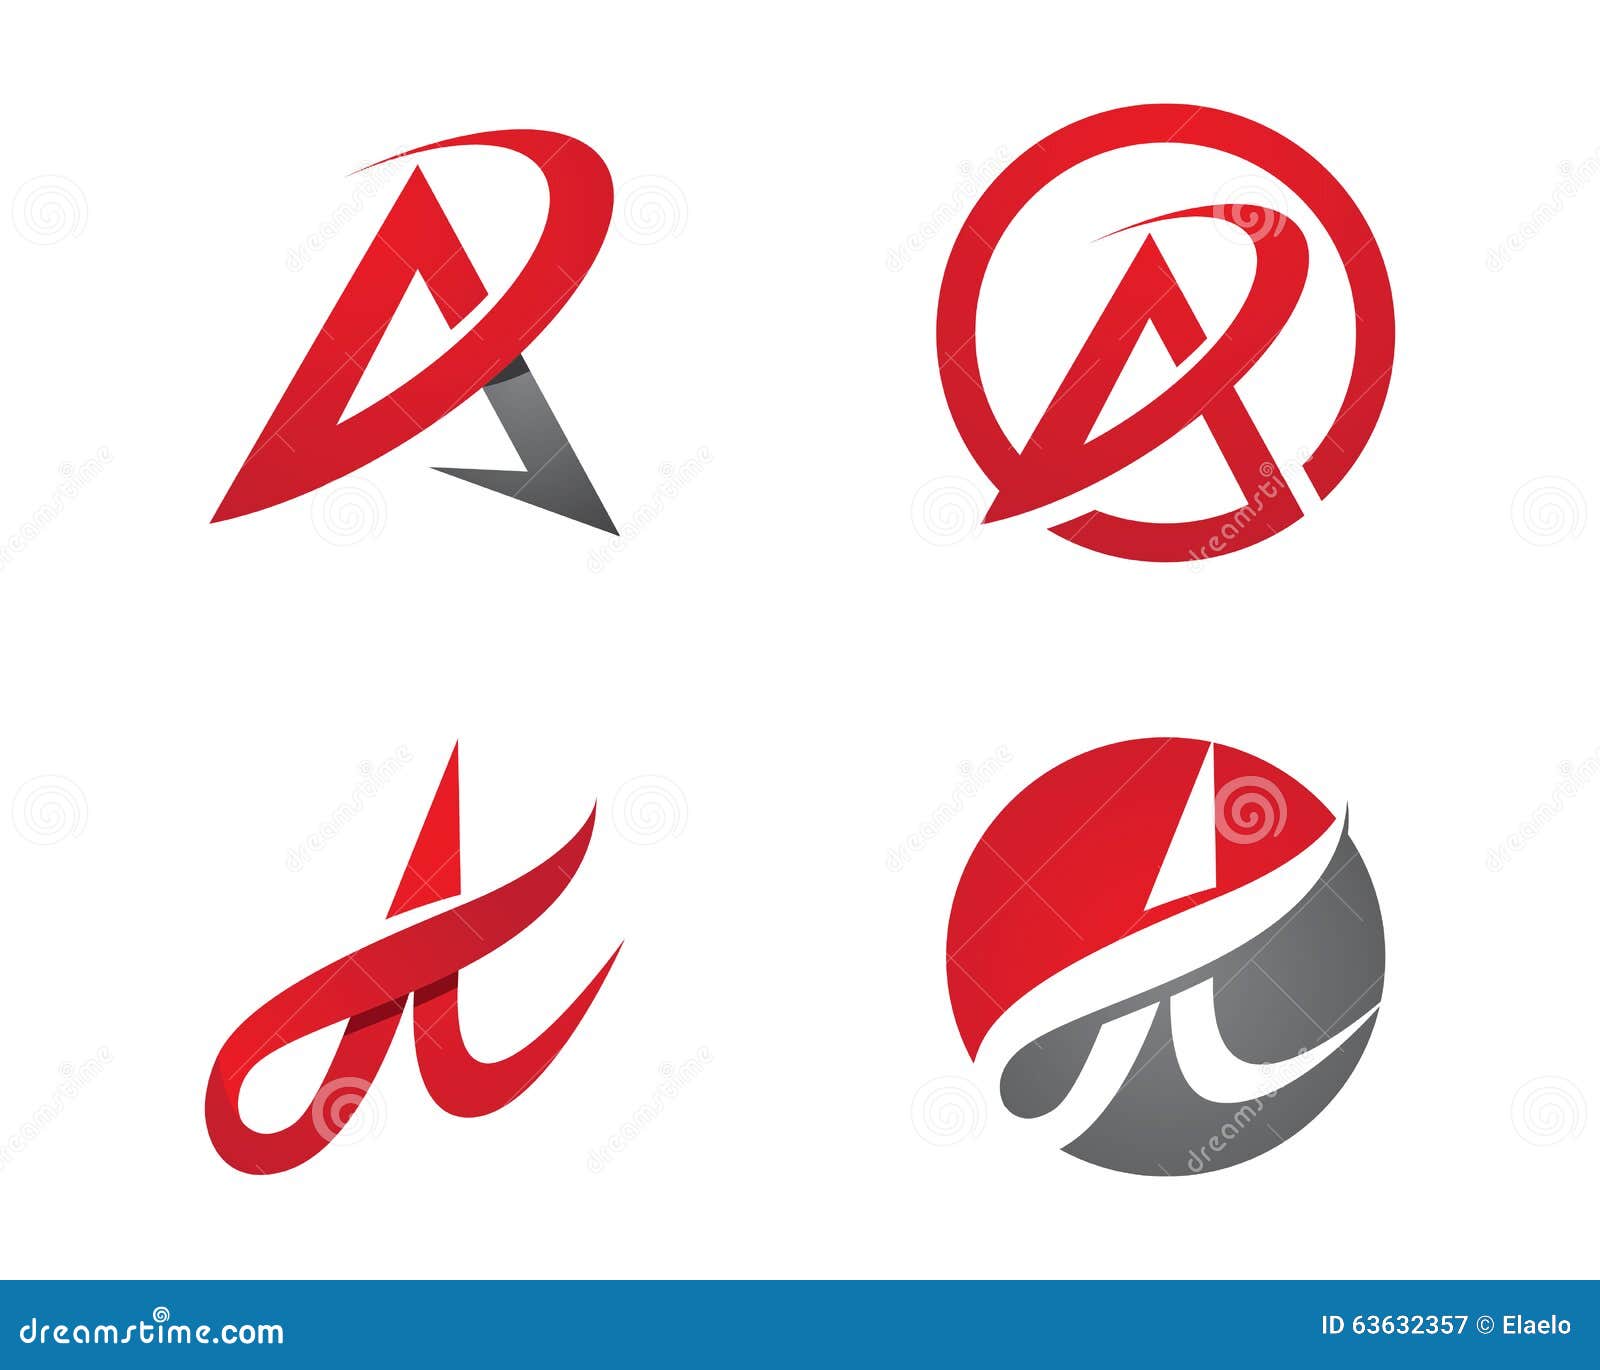 Letter Pm Logo Vector Art, Icons, and Graphics for Free Download